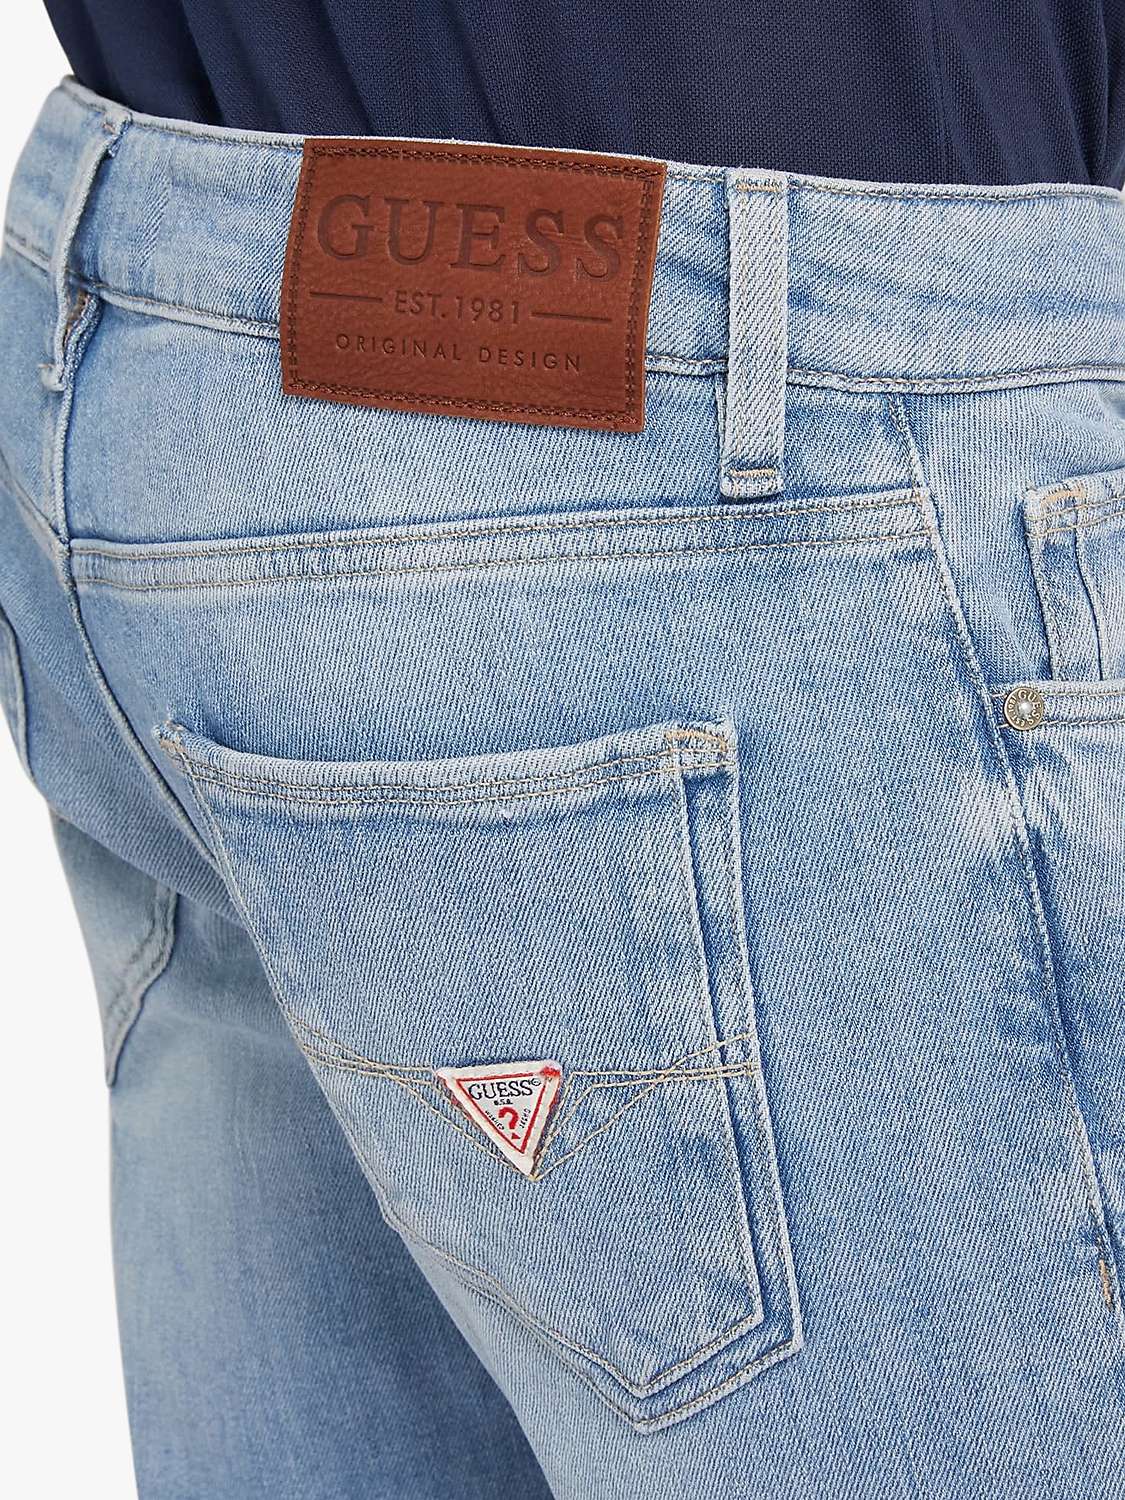 Buy GUESS Miami Skinny Fit Jeans, Carry Light Online at johnlewis.com